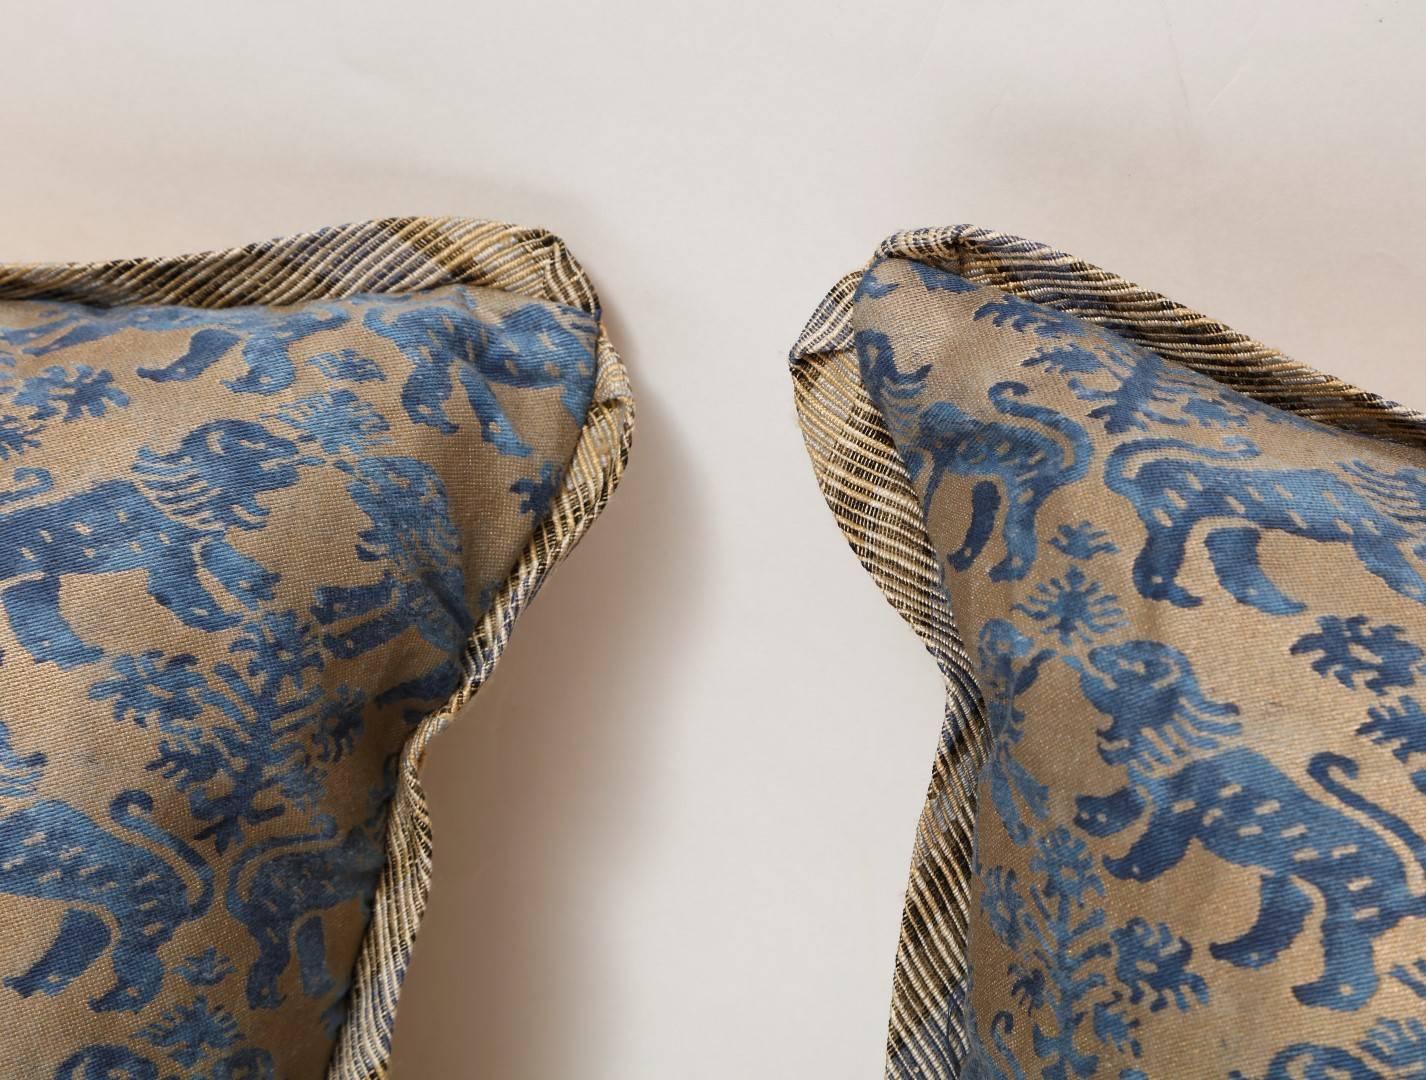 American A Pair of Fortuny Cushions in the Richelieu Pattern For Sale